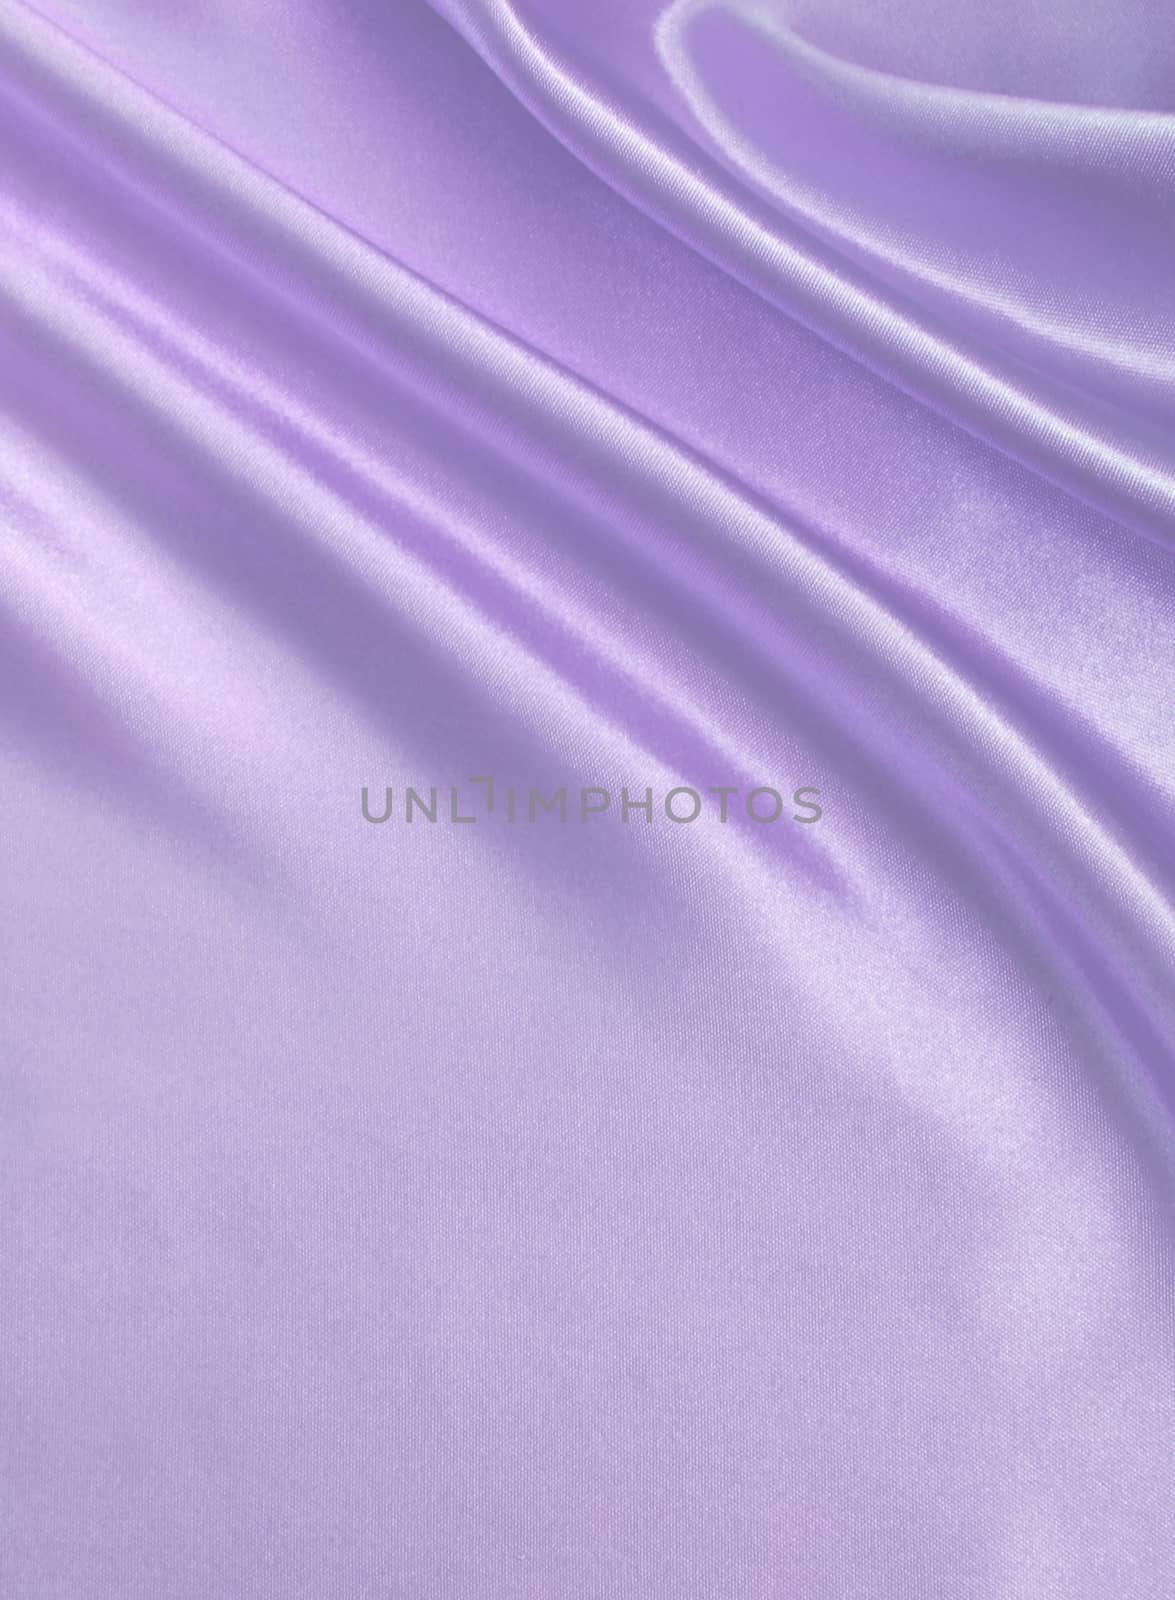 Smooth elegant lilac silk as background  by oxanatravel